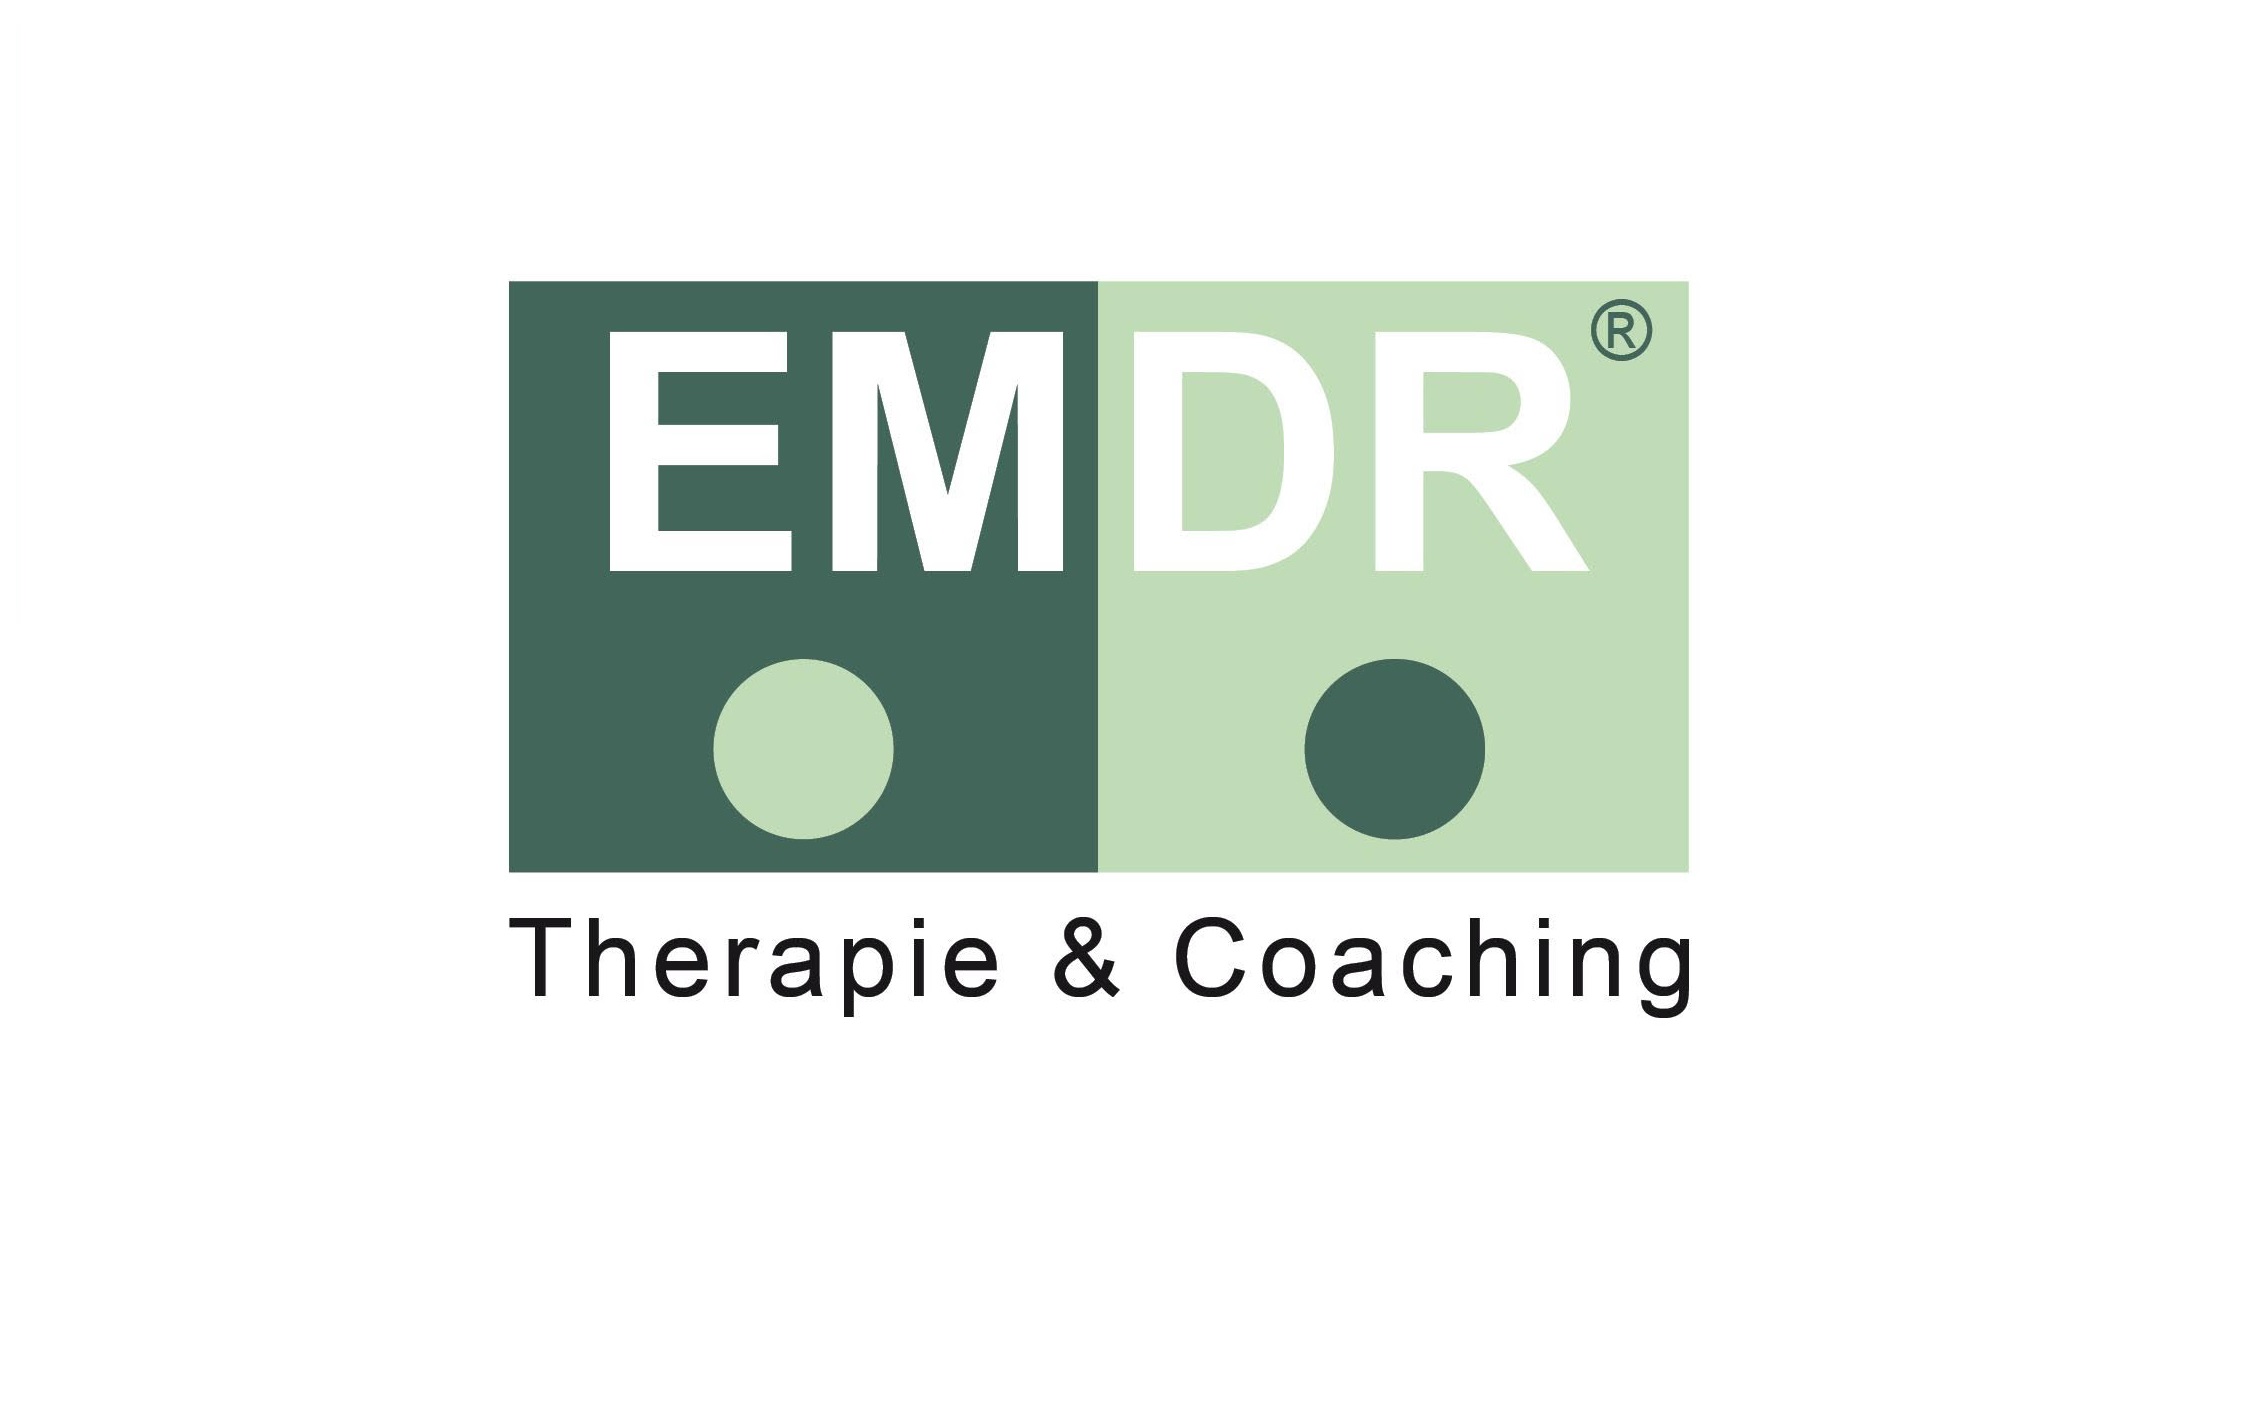 EMDR Therapy & Coaching